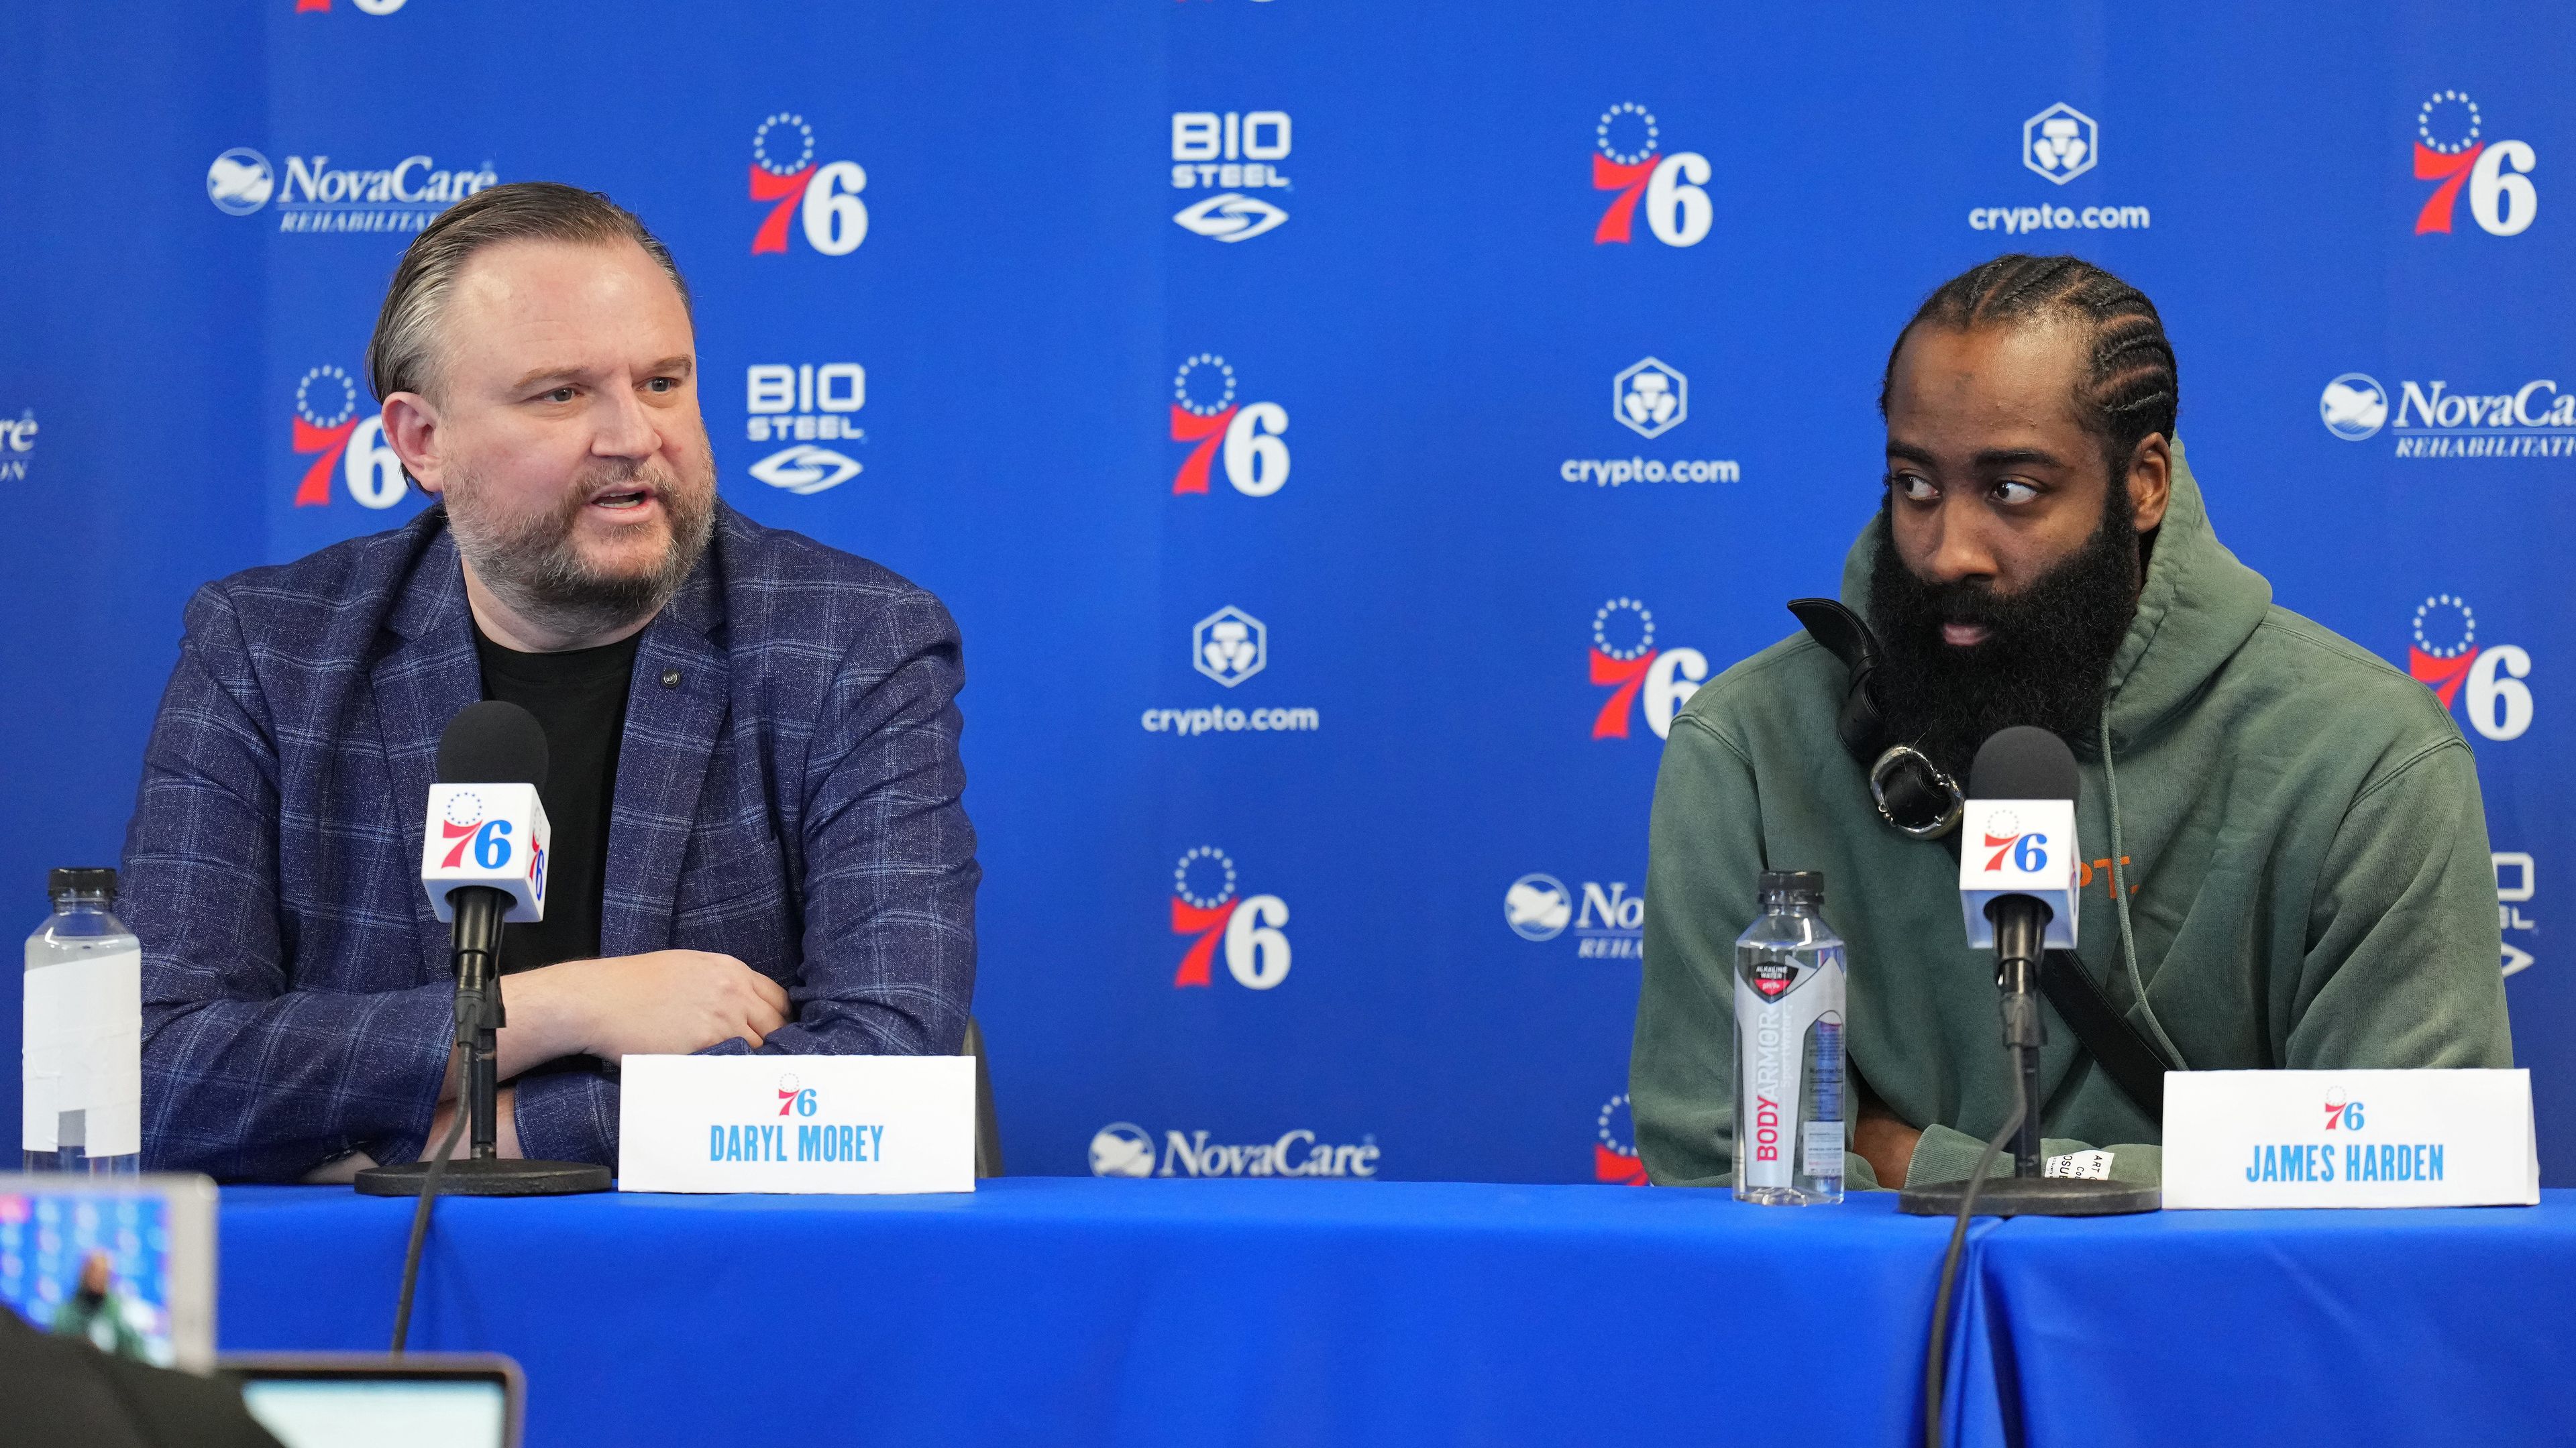 CAMDEN, NJ - FEBRUARY 15: Daryl Morey, President of Basketball Operations and James Harden #1 of the Philadelphia 76ers speak to the media during a press conference on February 15, 2022 at Philadelphia 76ers Training Complex in Camden, New Jersey. NOTE TO USER: User expressly acknowledges and agrees that, by downloading and/or using this Photograph, user is consenting to the terms and conditions of the Getty Images License Agreement. Mandatory Copyright Notice: Copyright 2022 NBAE (Photo by Jess